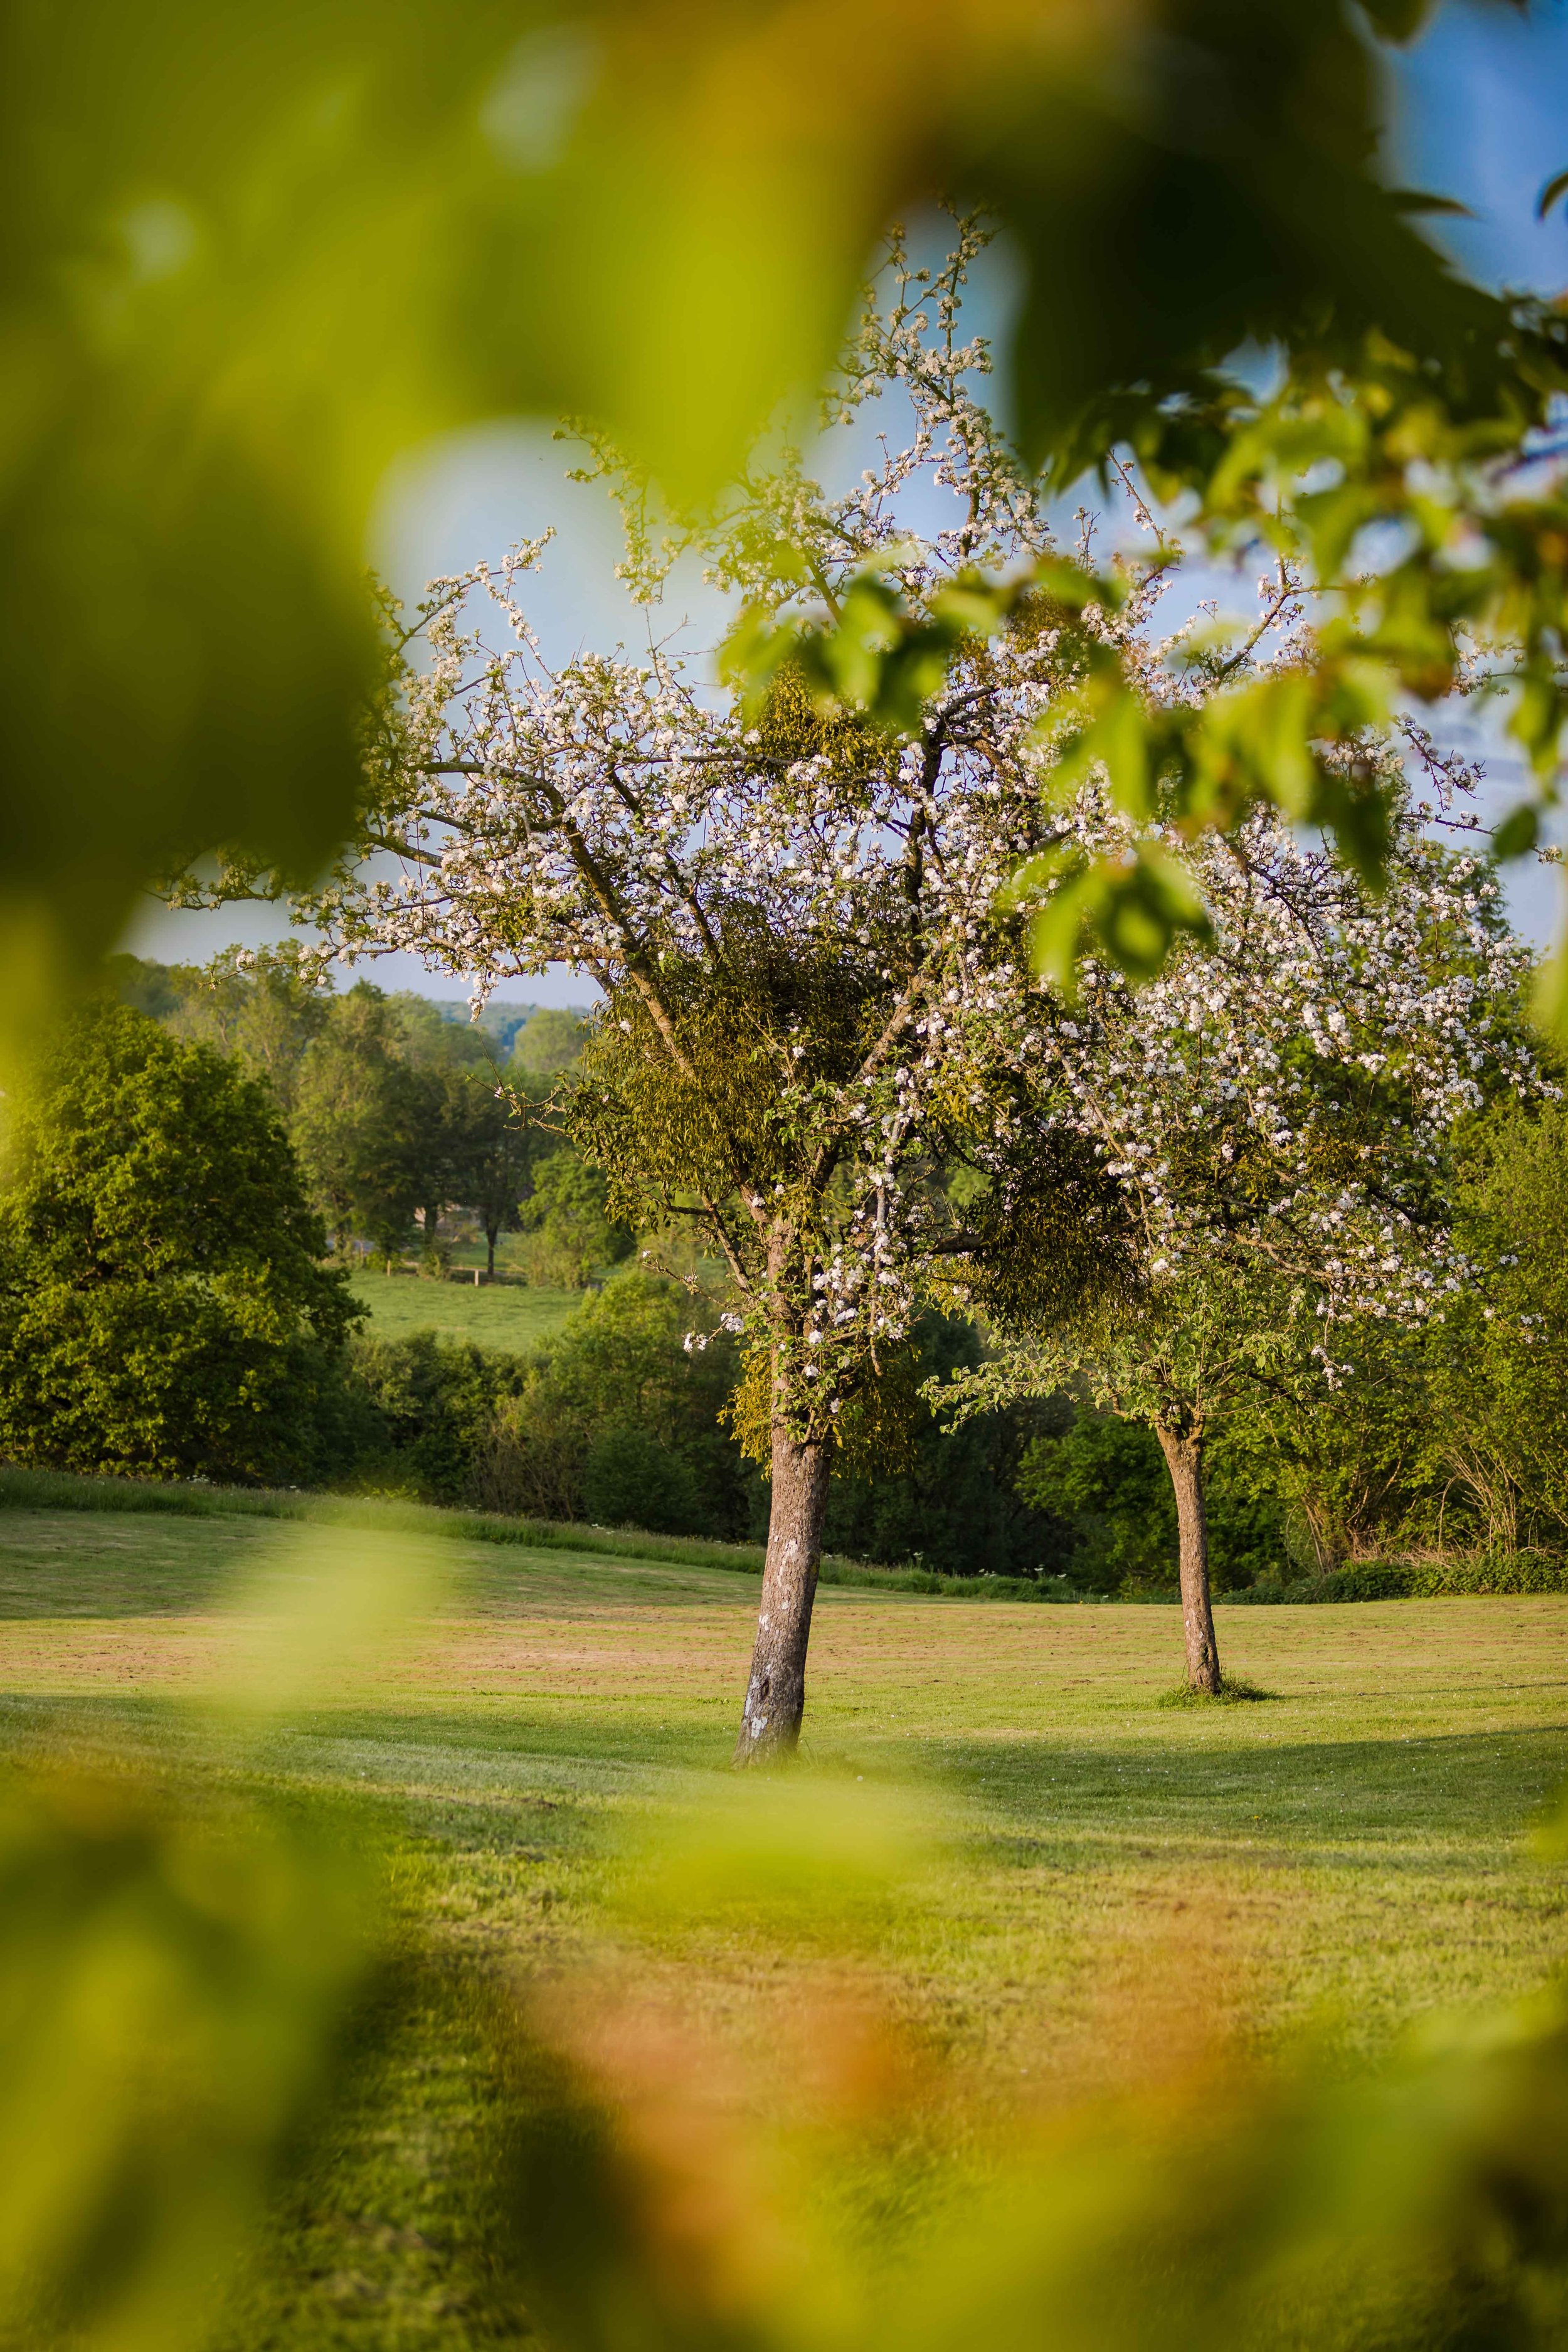 A cluster of trees on a manicured lawn in the Spring; a perfect setting for weekend getaways in France.